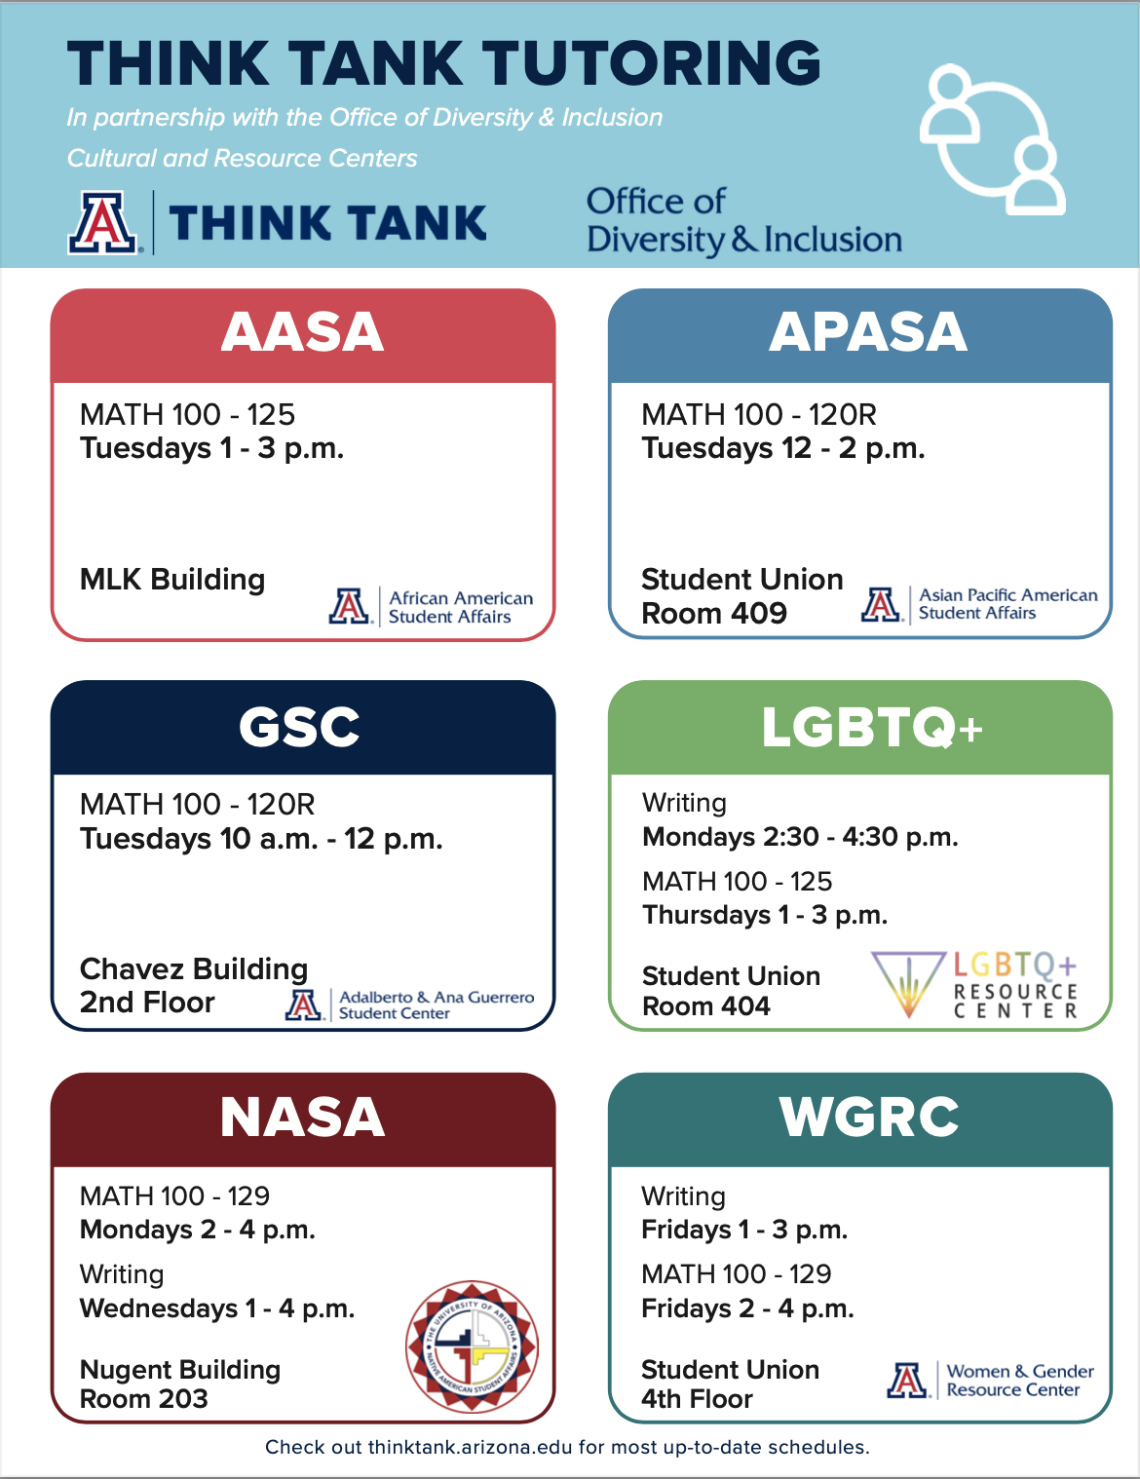 White flyer with blue header. Below, boxes that resemble name tags are arranged in a 2 by 3 grid, each naming a cultural center and the hours math and writing tutors are available in each space. In addition to writing tutoring, Math tutoring is available in the LGBTQ+ RC Thursdays from 1-3. Student Union room 404